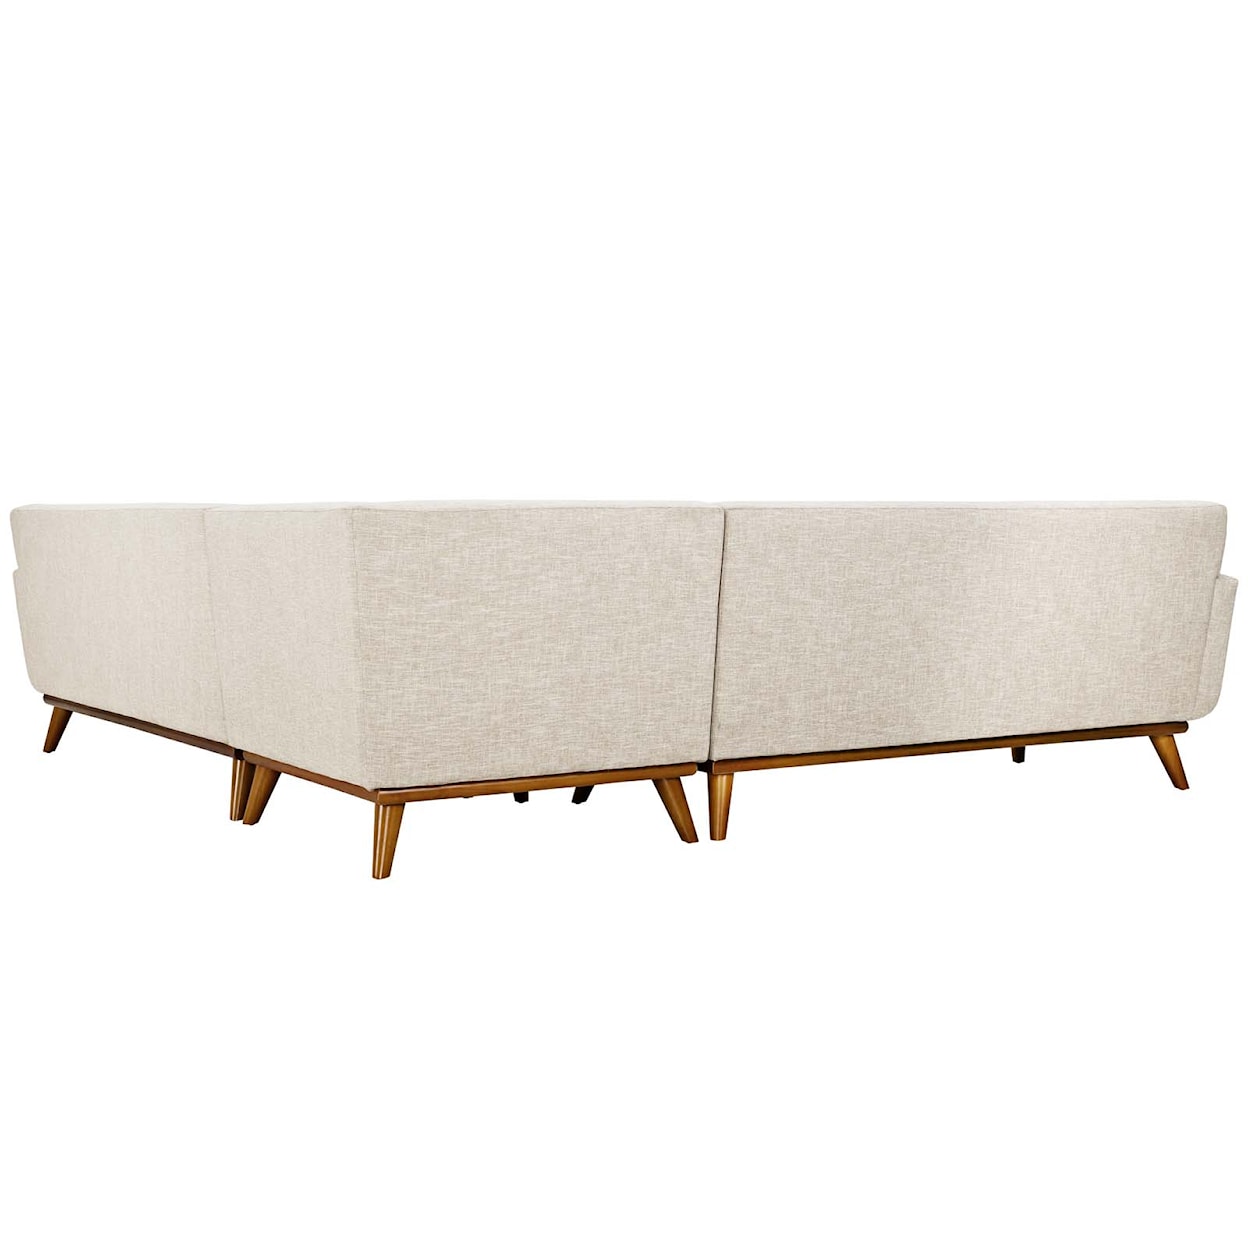 Modway Engage L-Shaped Sectional Sofa